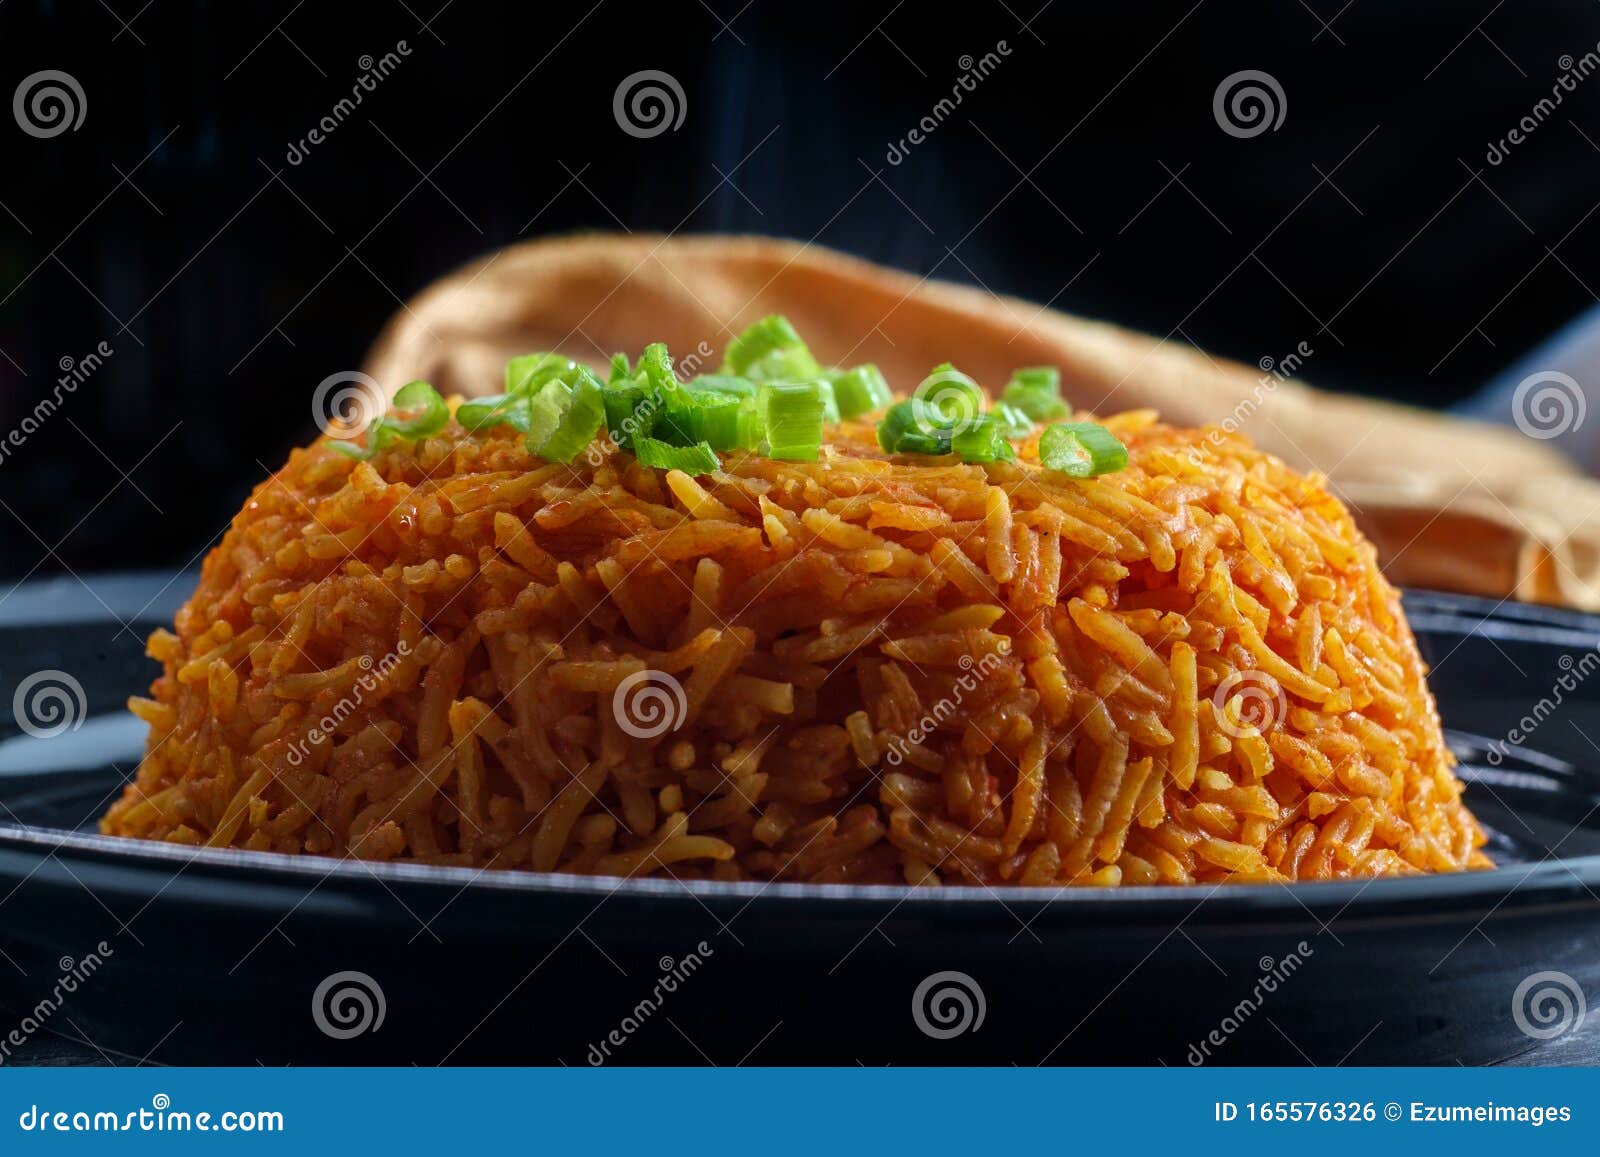 colombian red rice